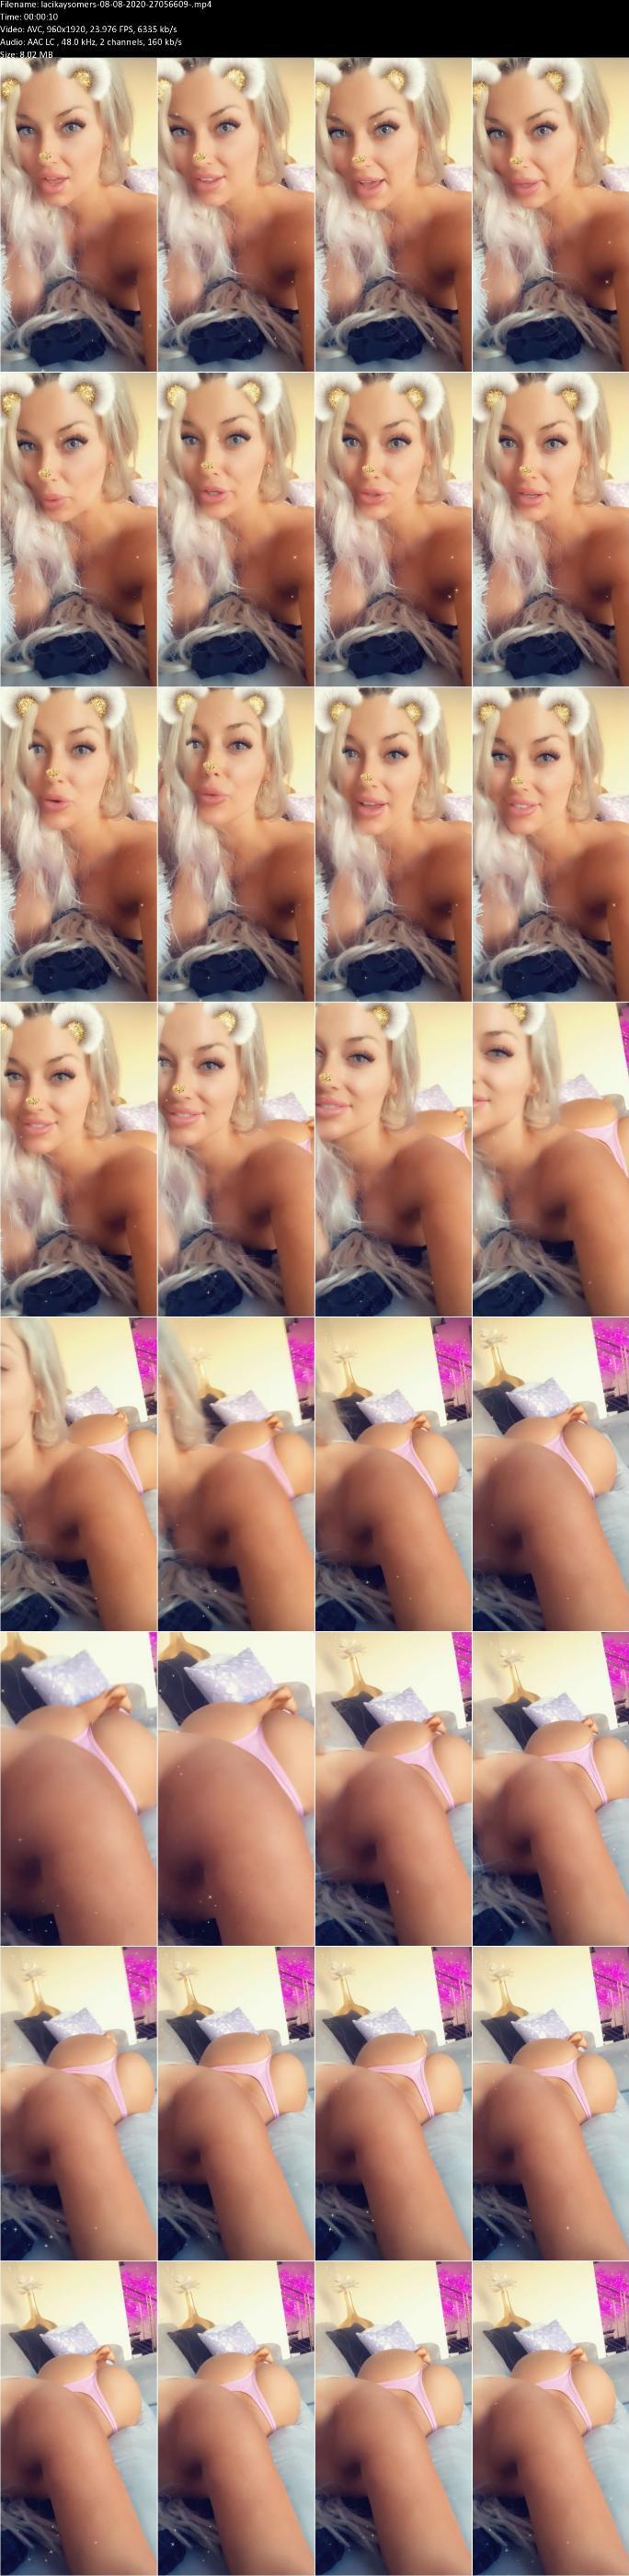 Laci kay somers vip onlyfans